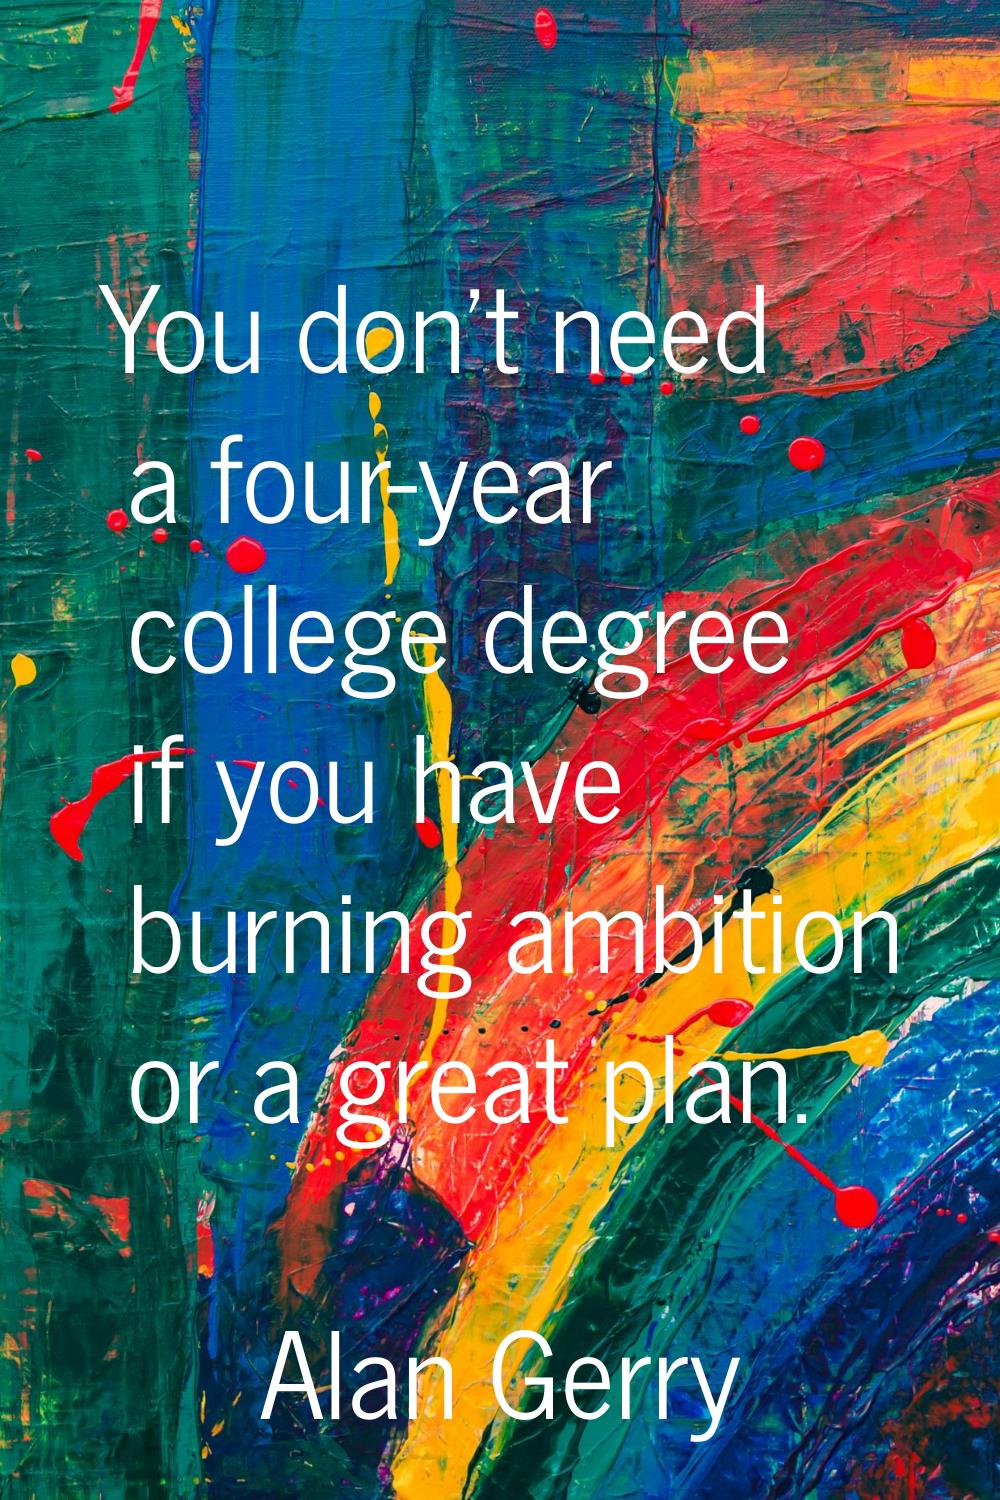 You don't need a four-year college degree if you have burning ambition or a great plan.